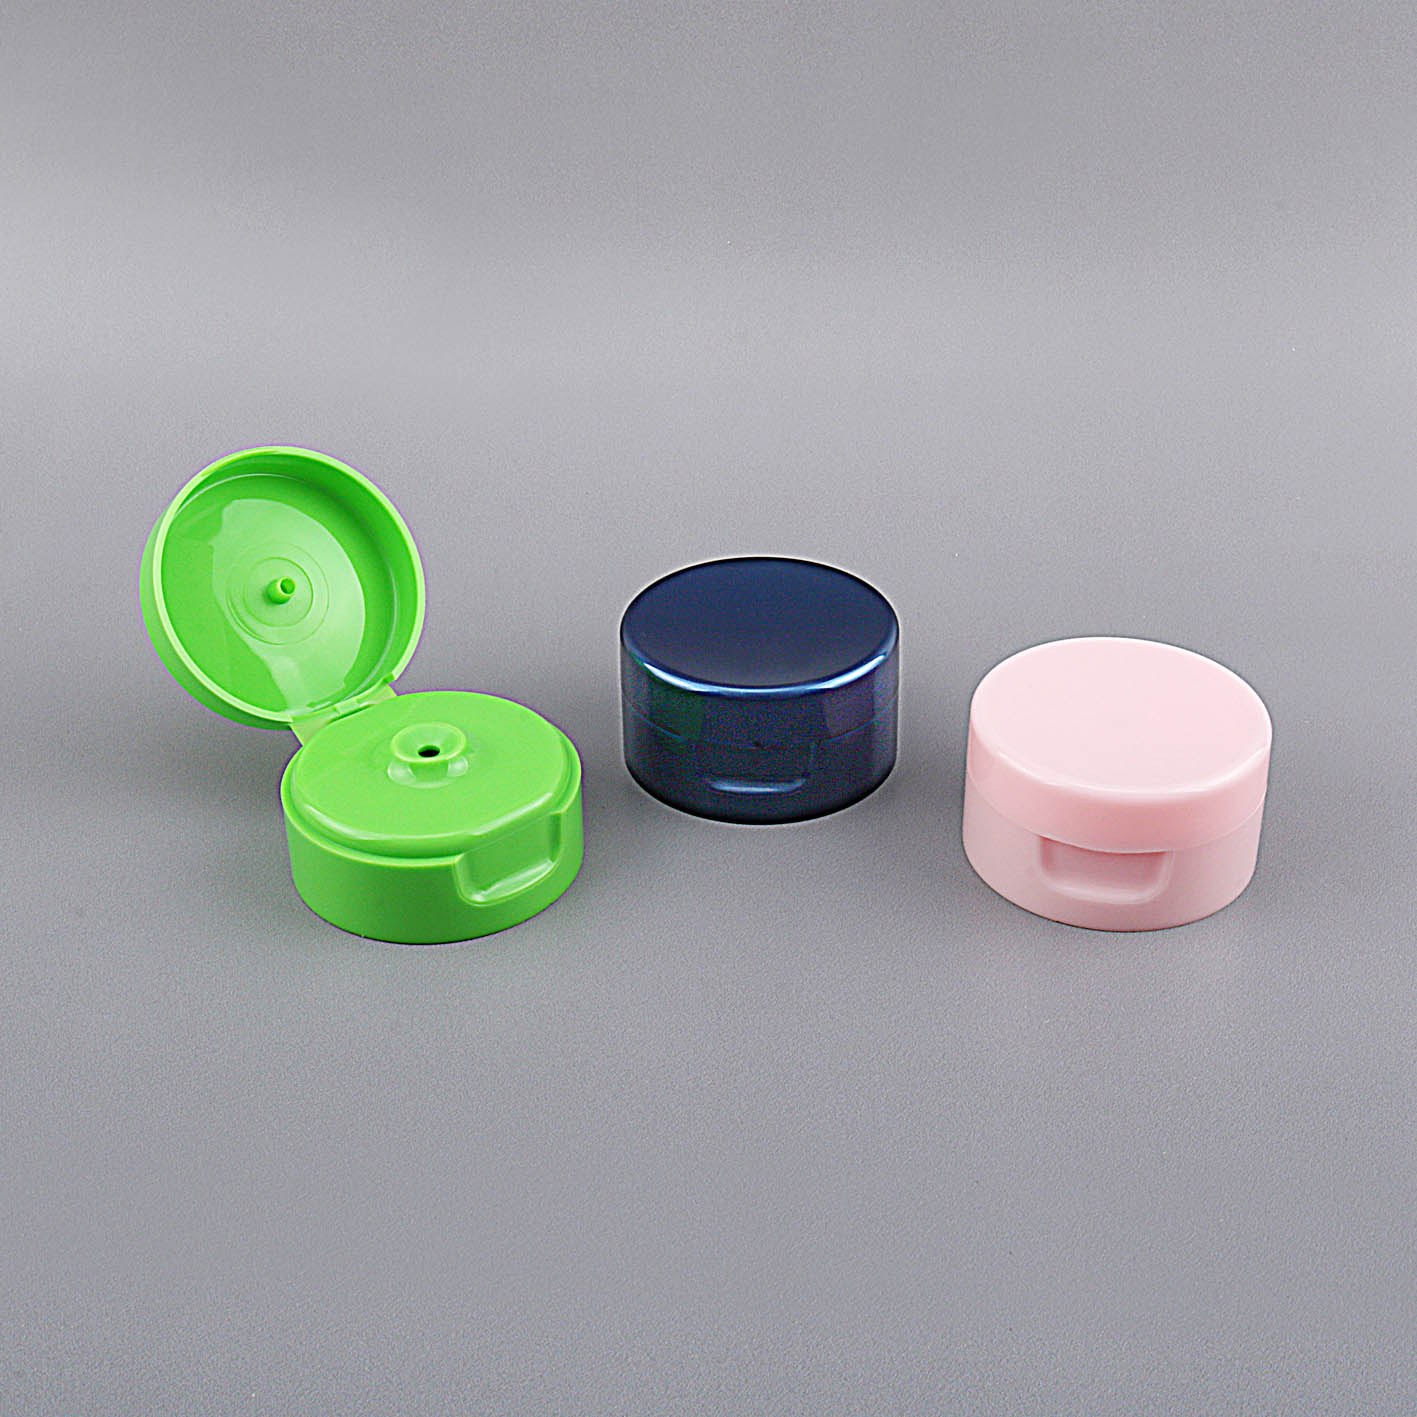 50mm_Diameter_Customized_Shampoo_Tubes_with_Glossy_Flip_Top_Caps2